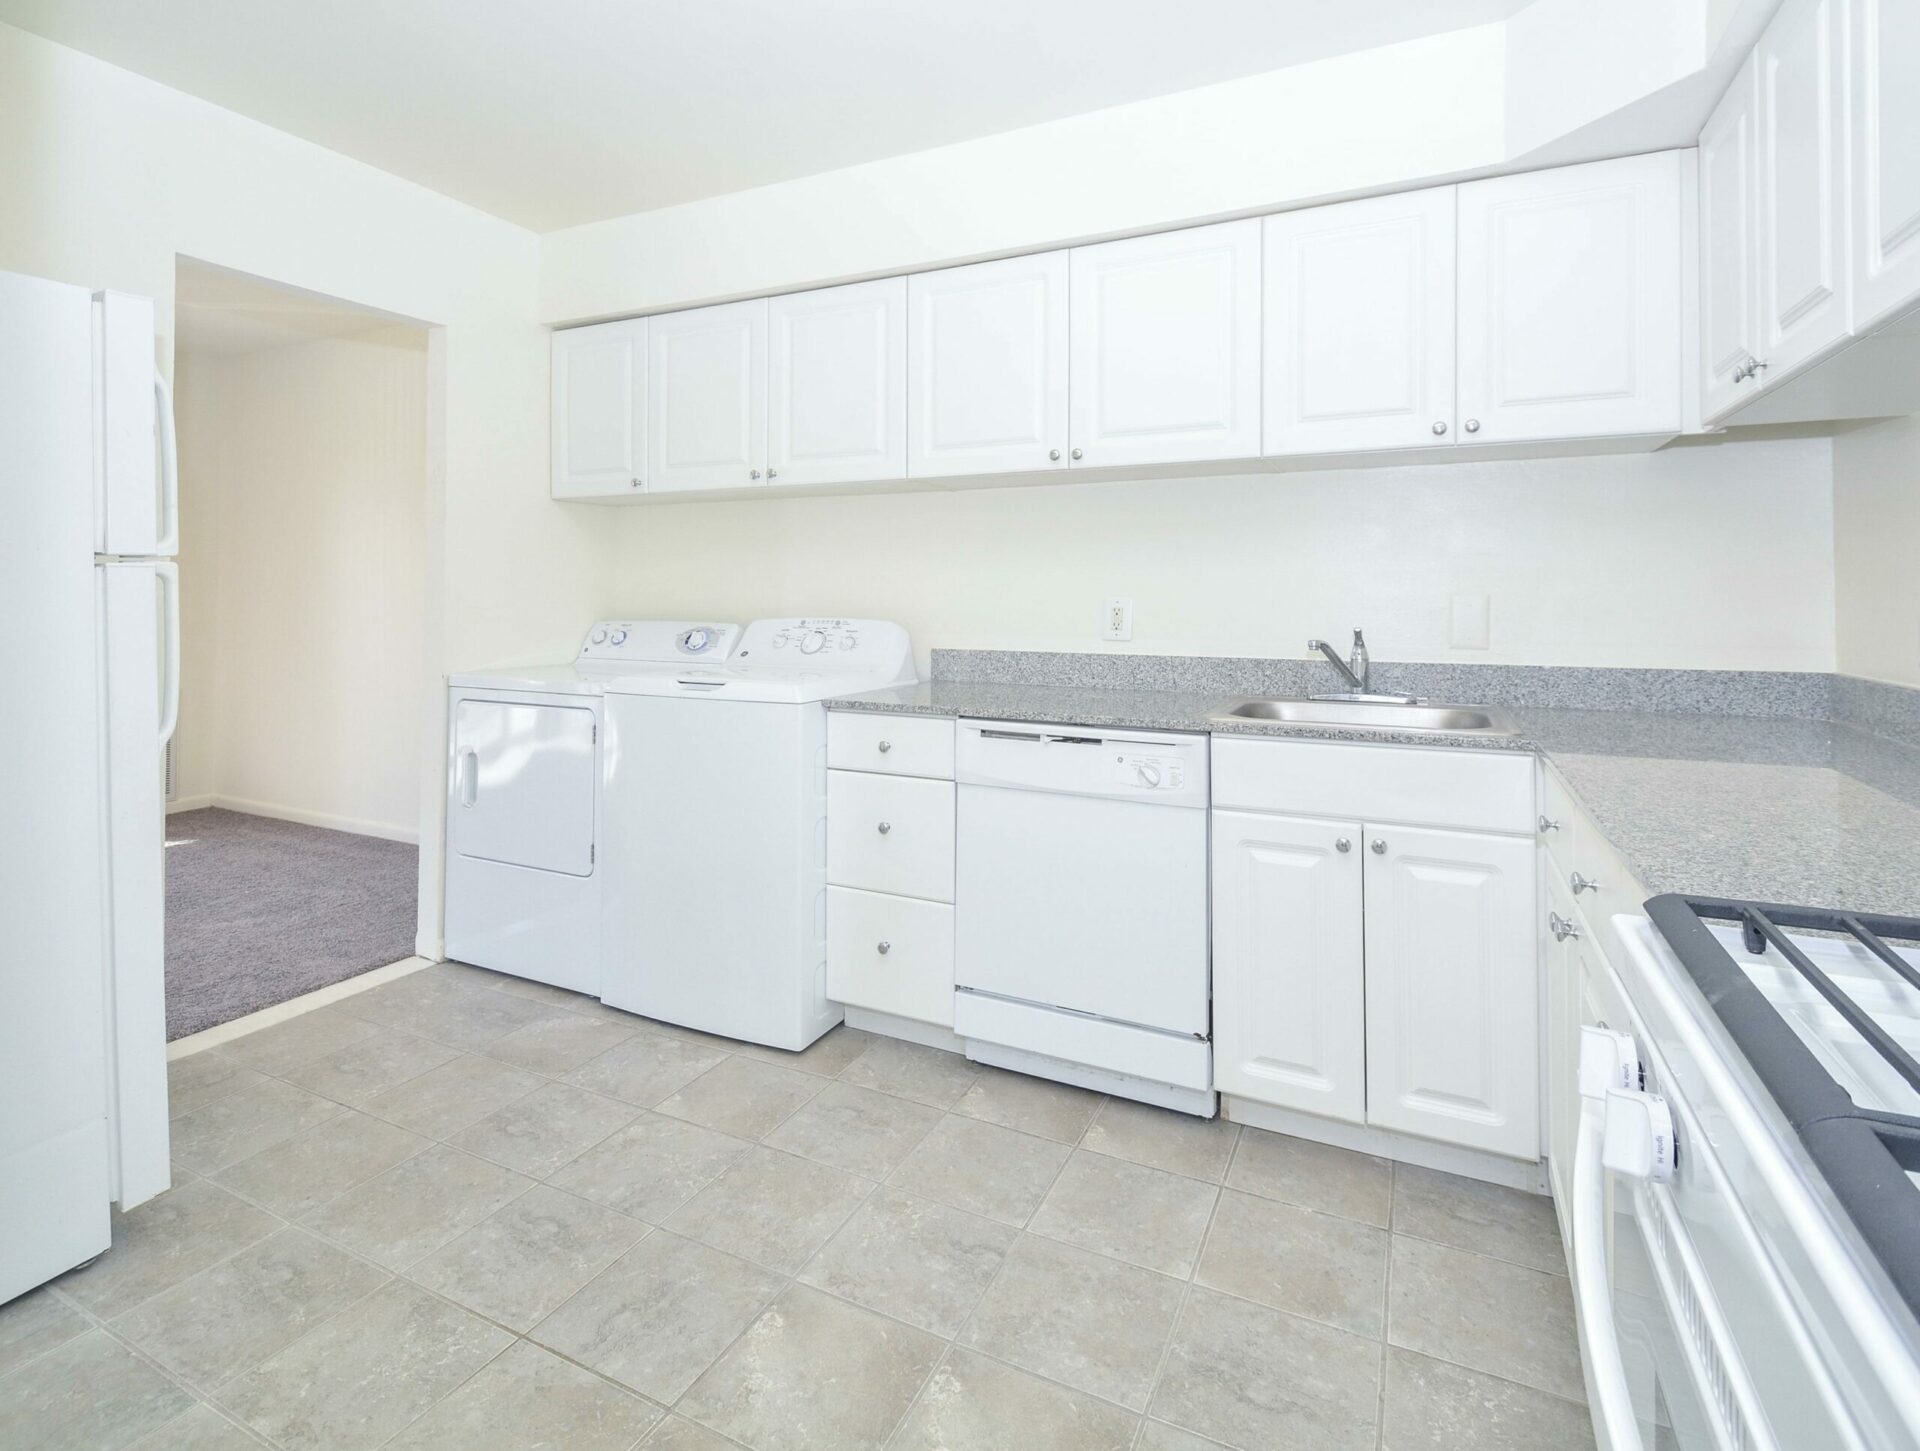 Kitchen area with washer and dryer, white appliances, and white cabinets.